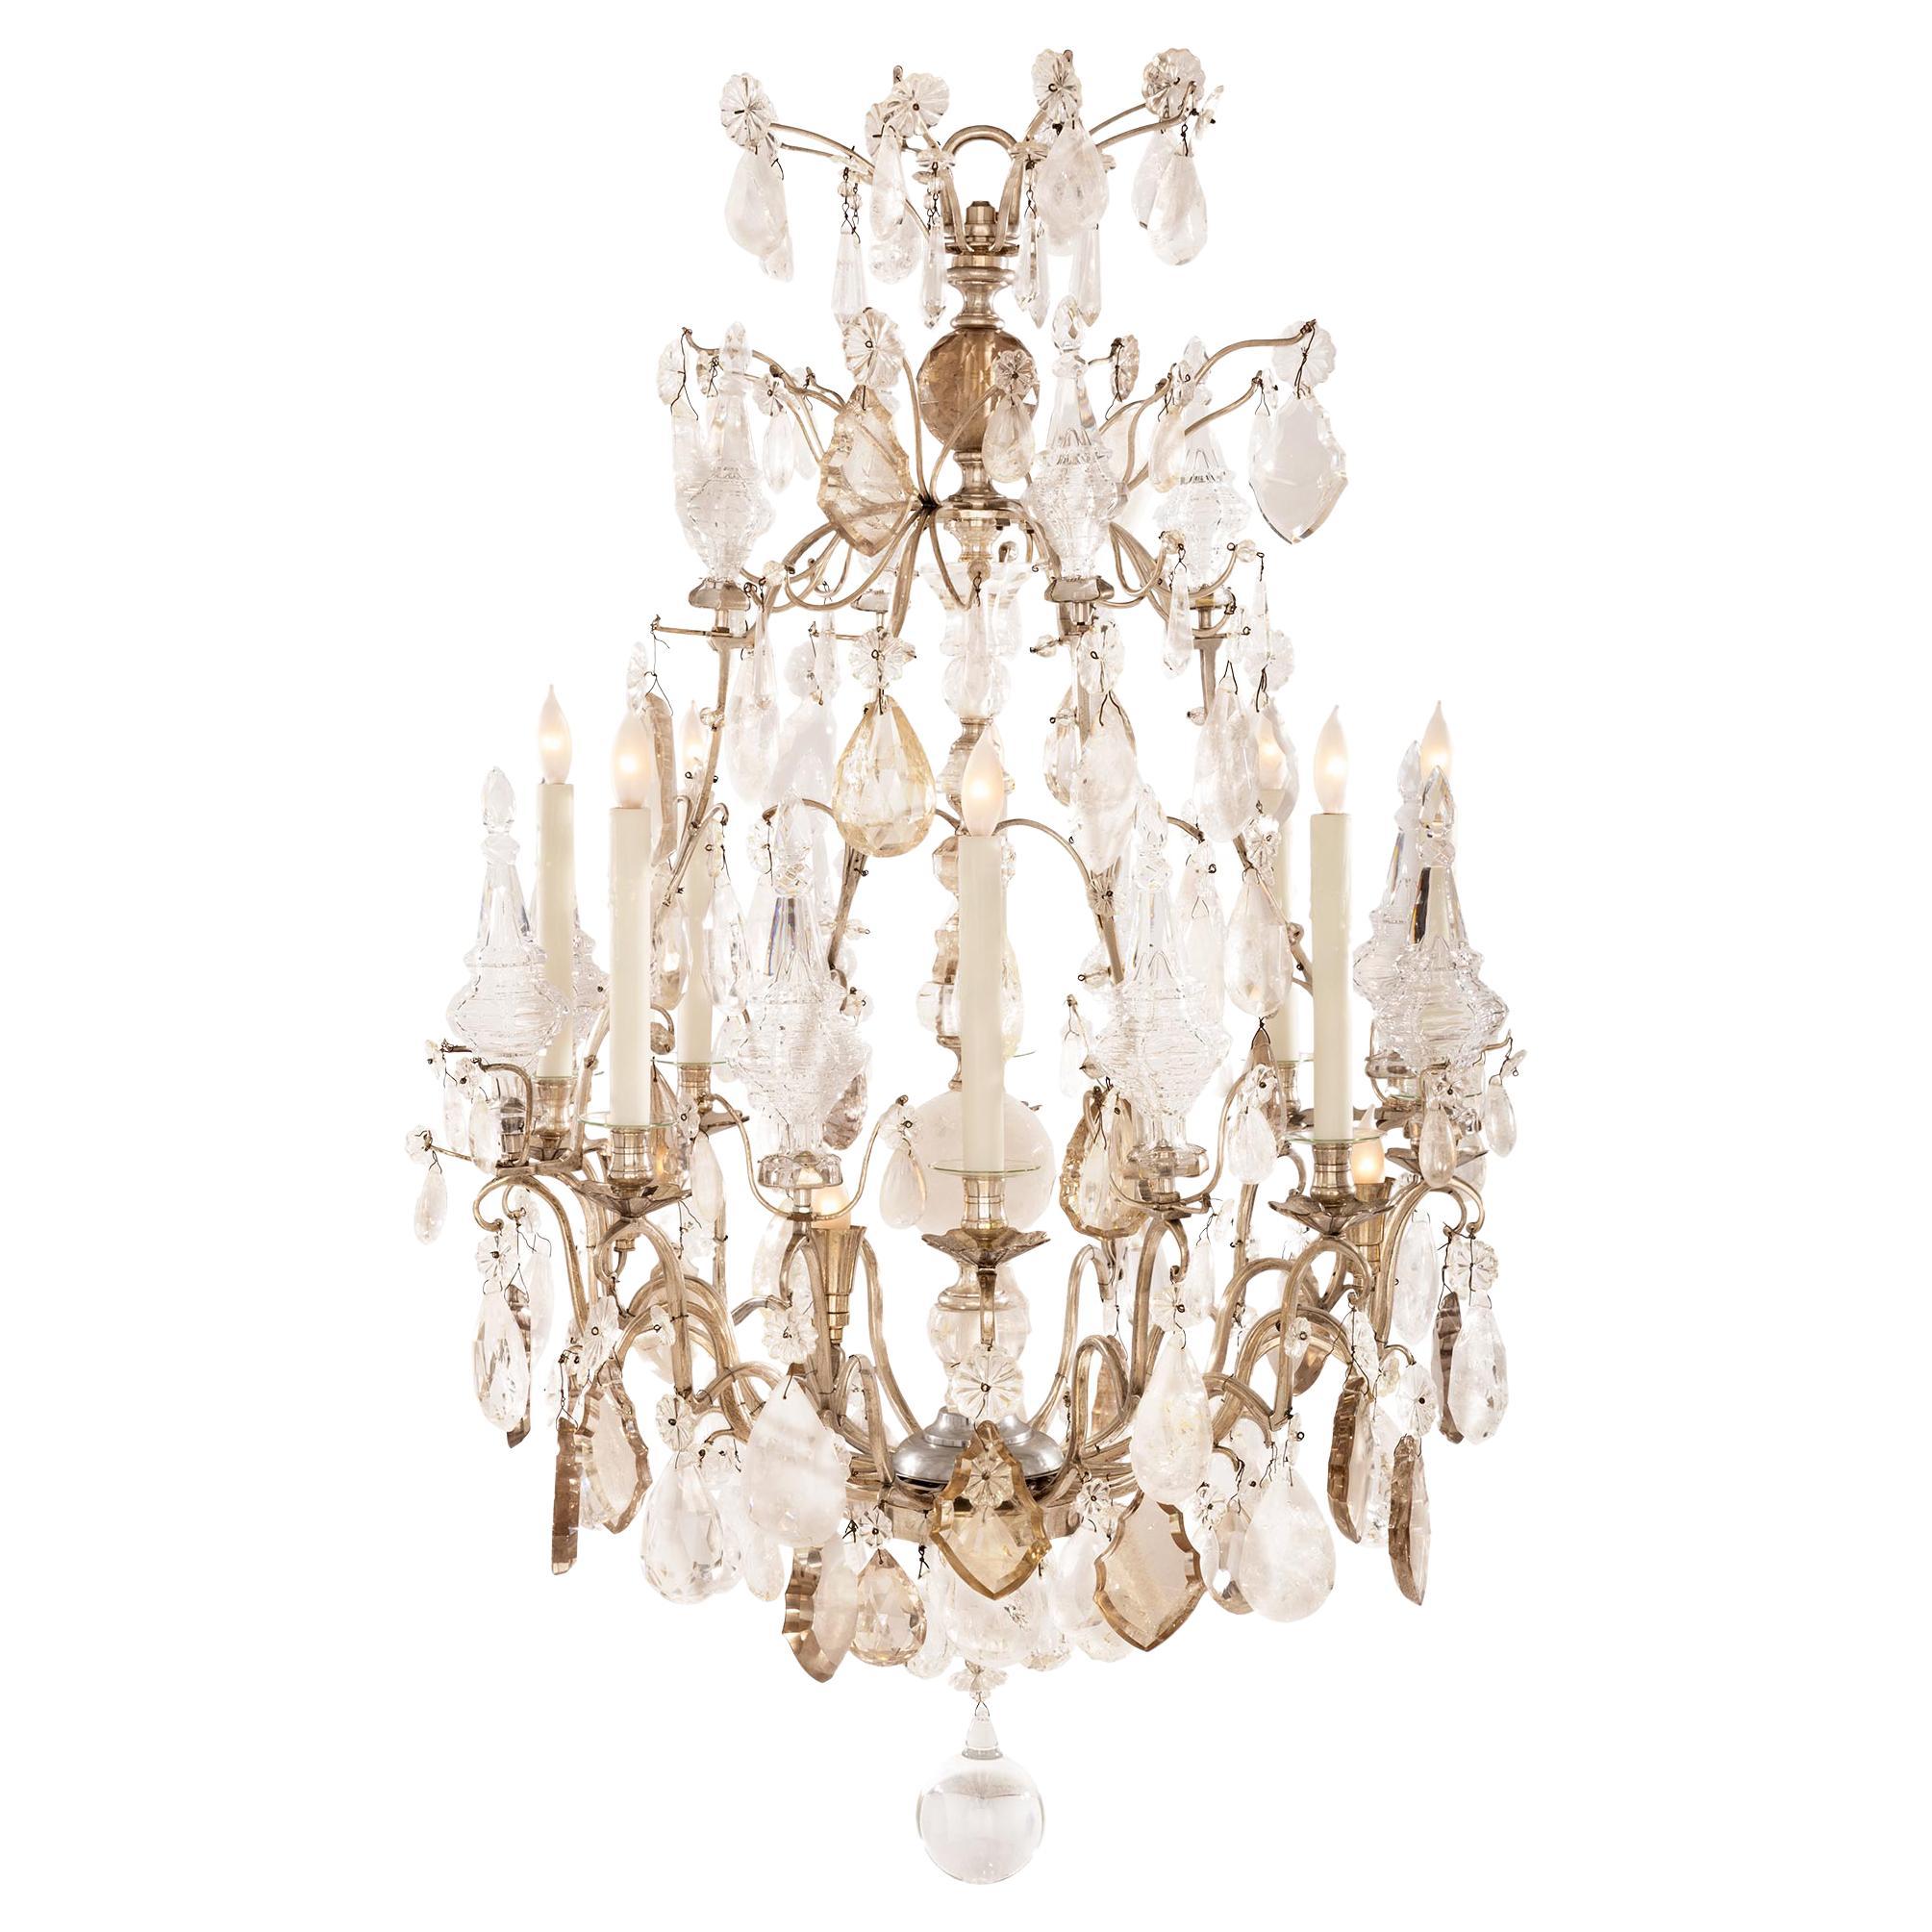 French 19th Century Louis XV St. Silvered Bronze And Rock Crystal Chandelier